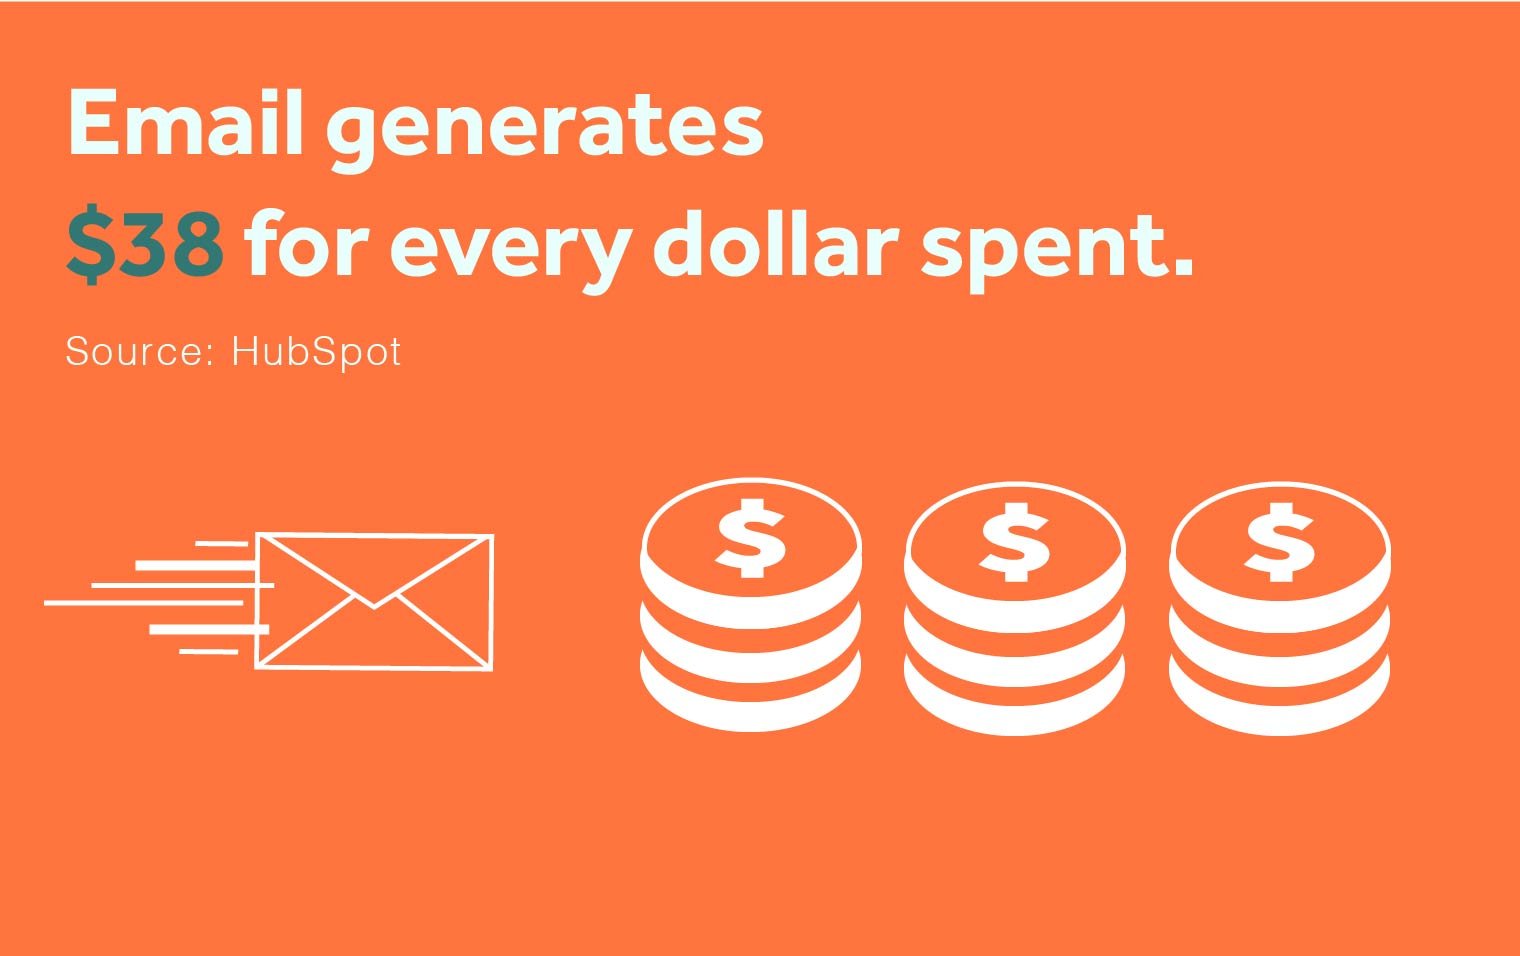 Email generates $38 for every dollar spent.